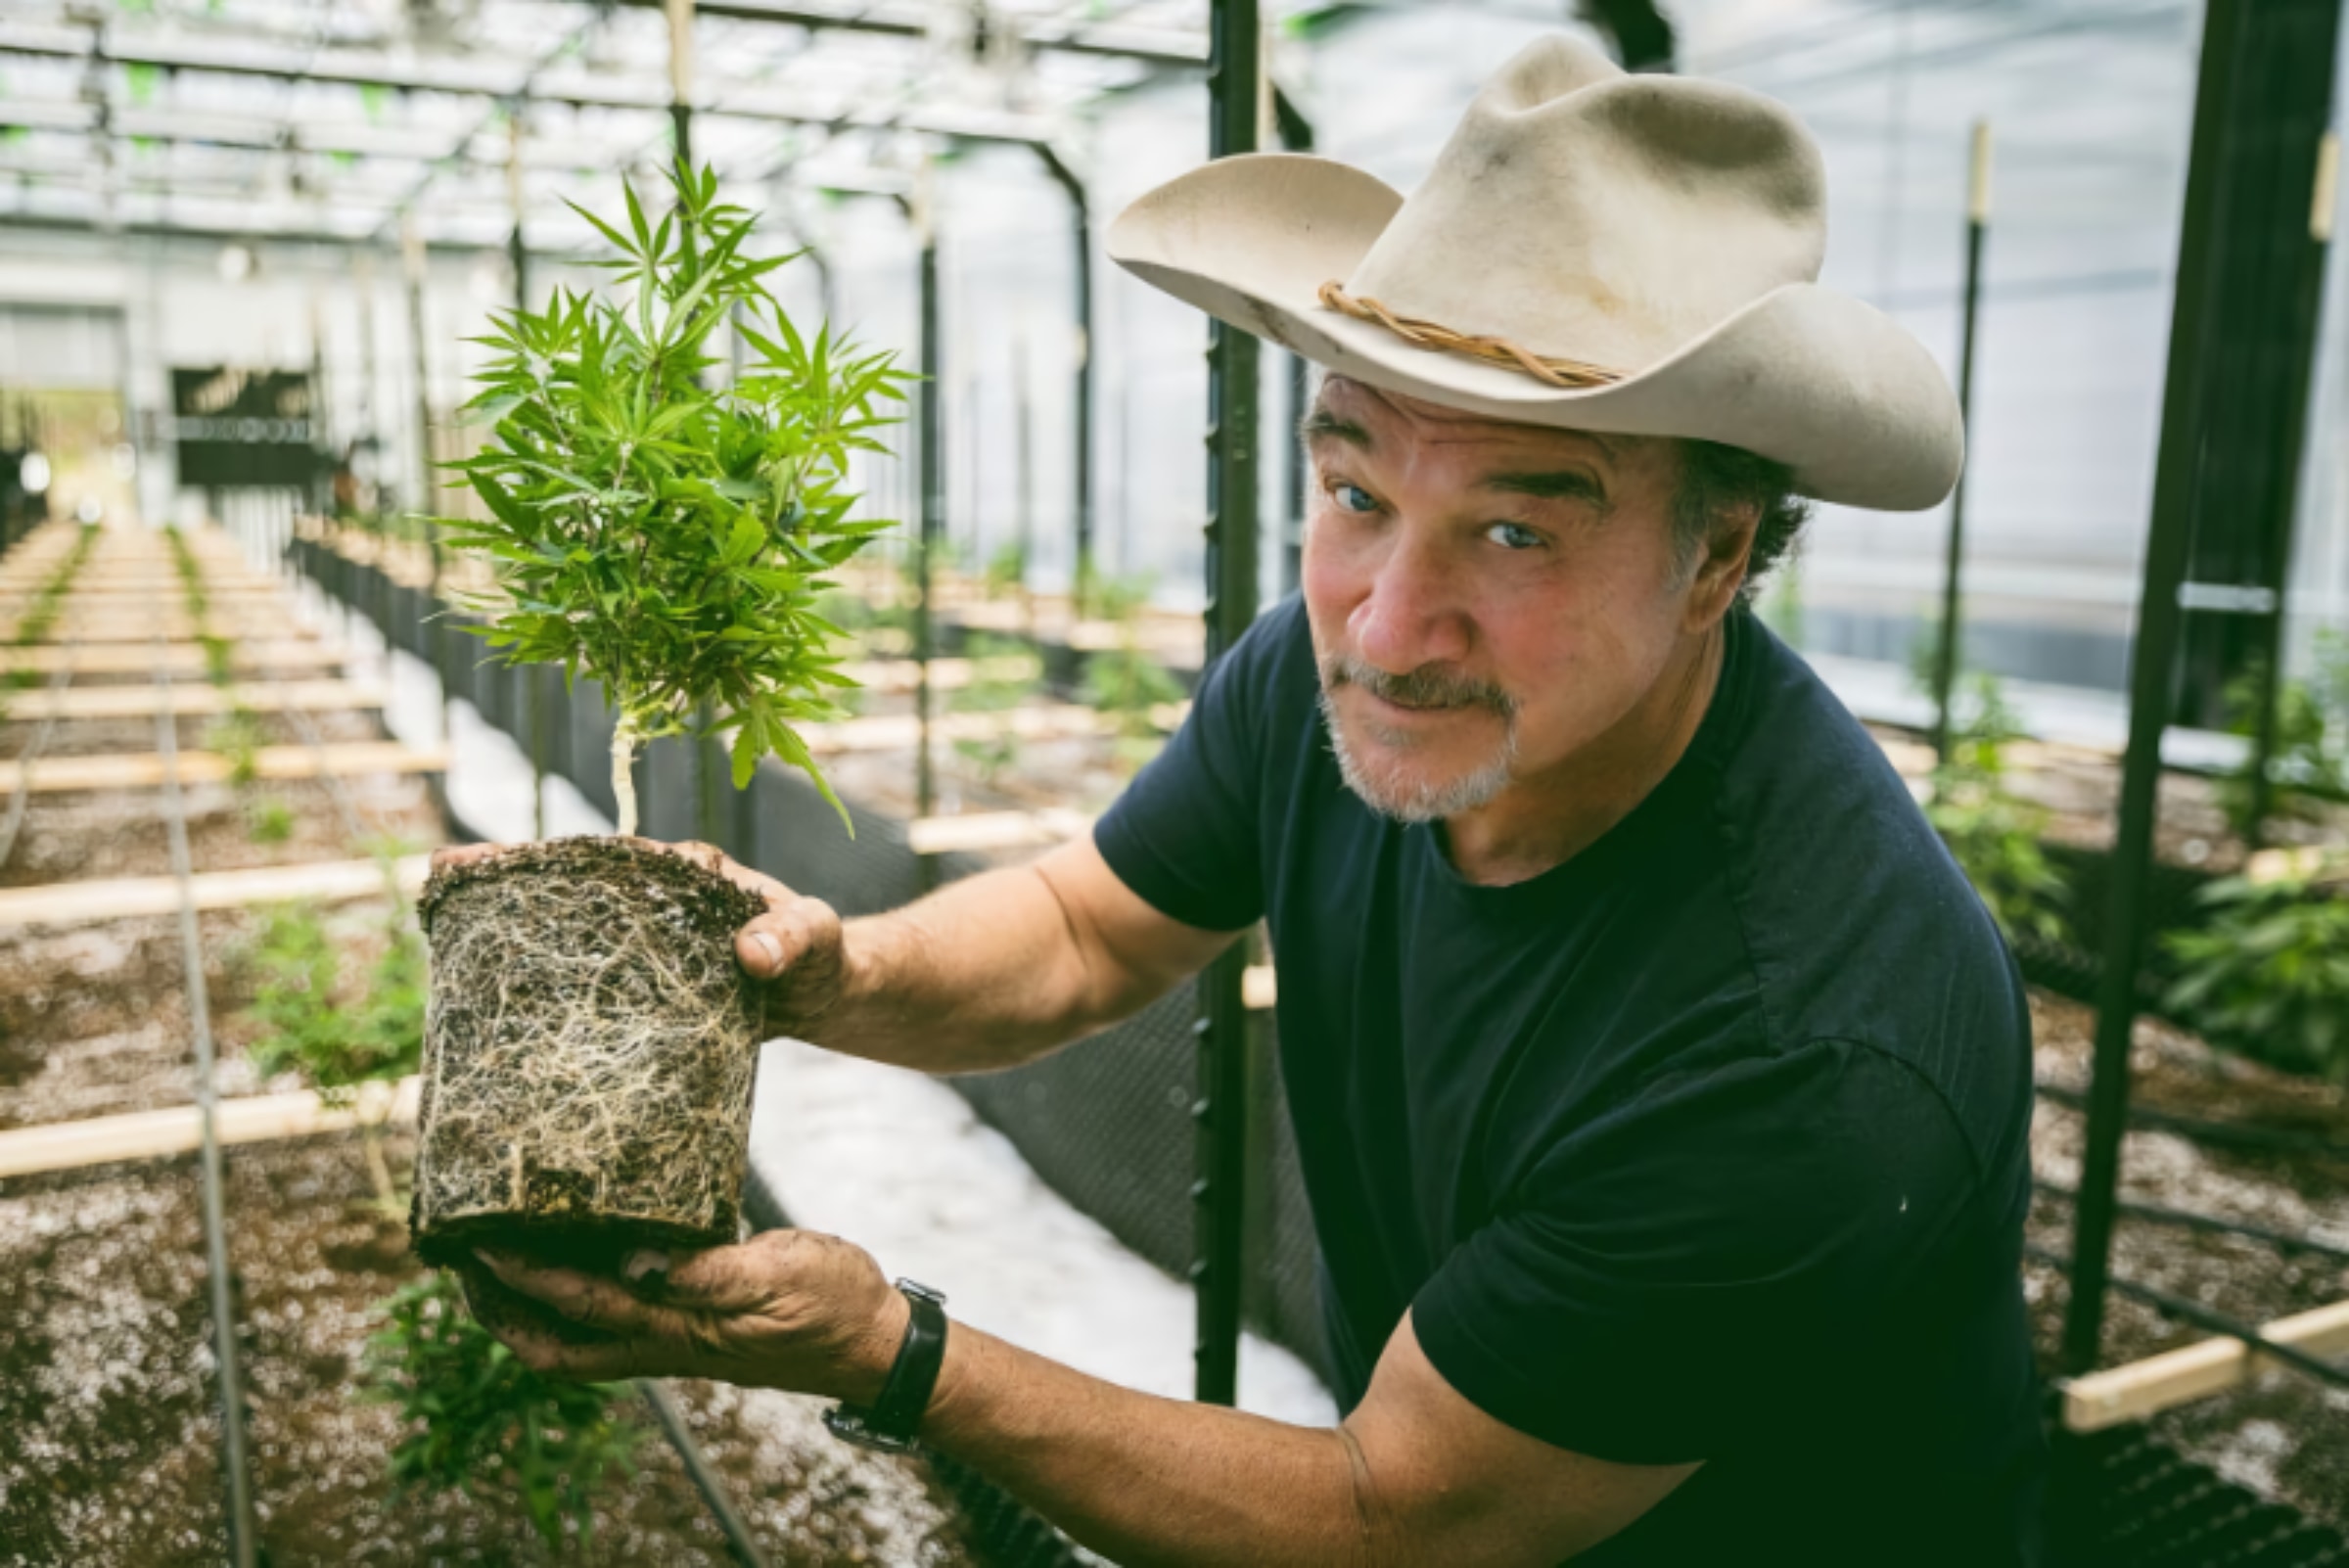 Jim Belushi’s Show about growing weed gets a new season starting this month